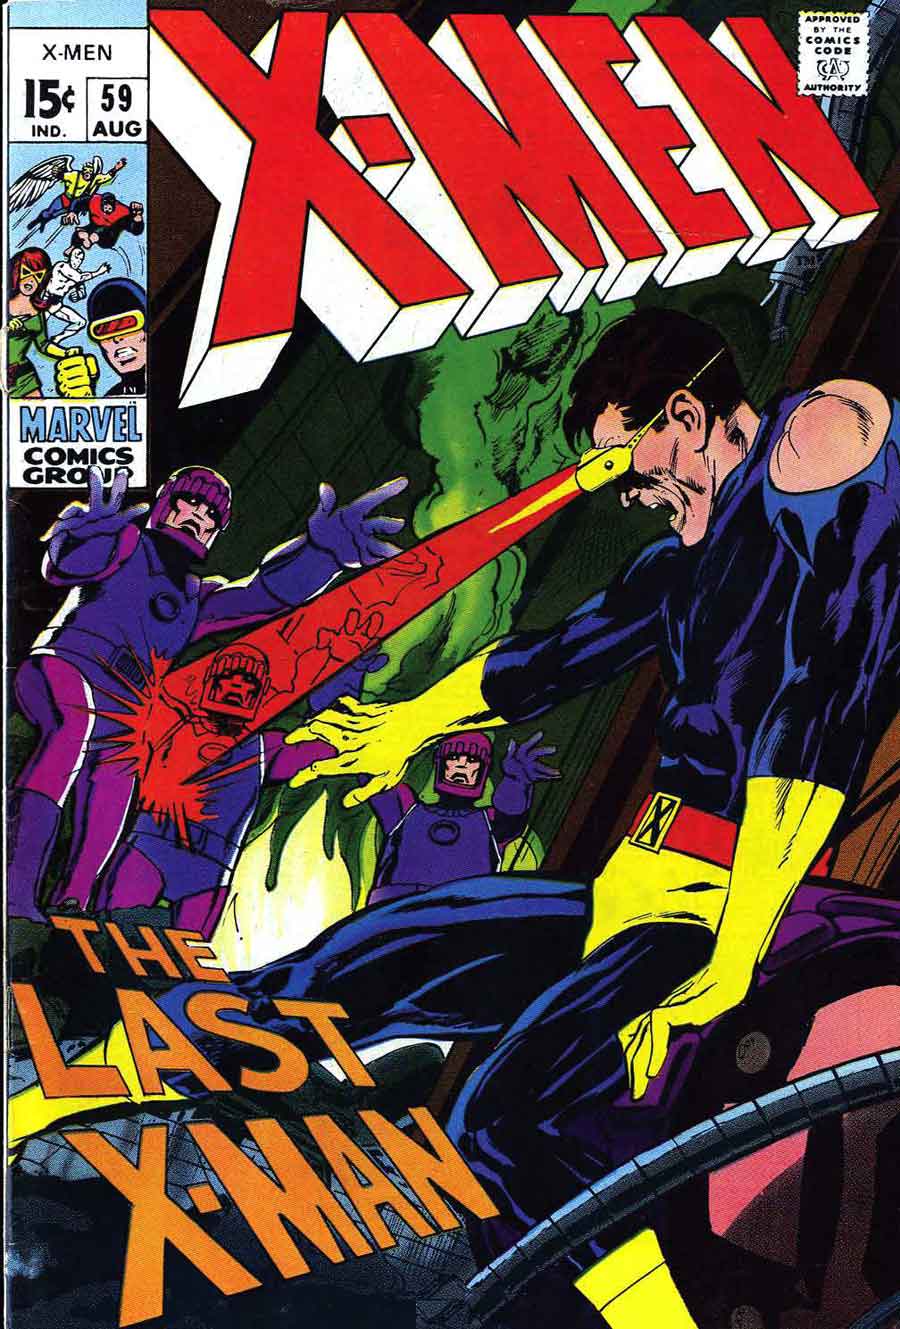 X-men #59 cover art by Neal Adams / silver age 1960s marvel comic book / Sentinels